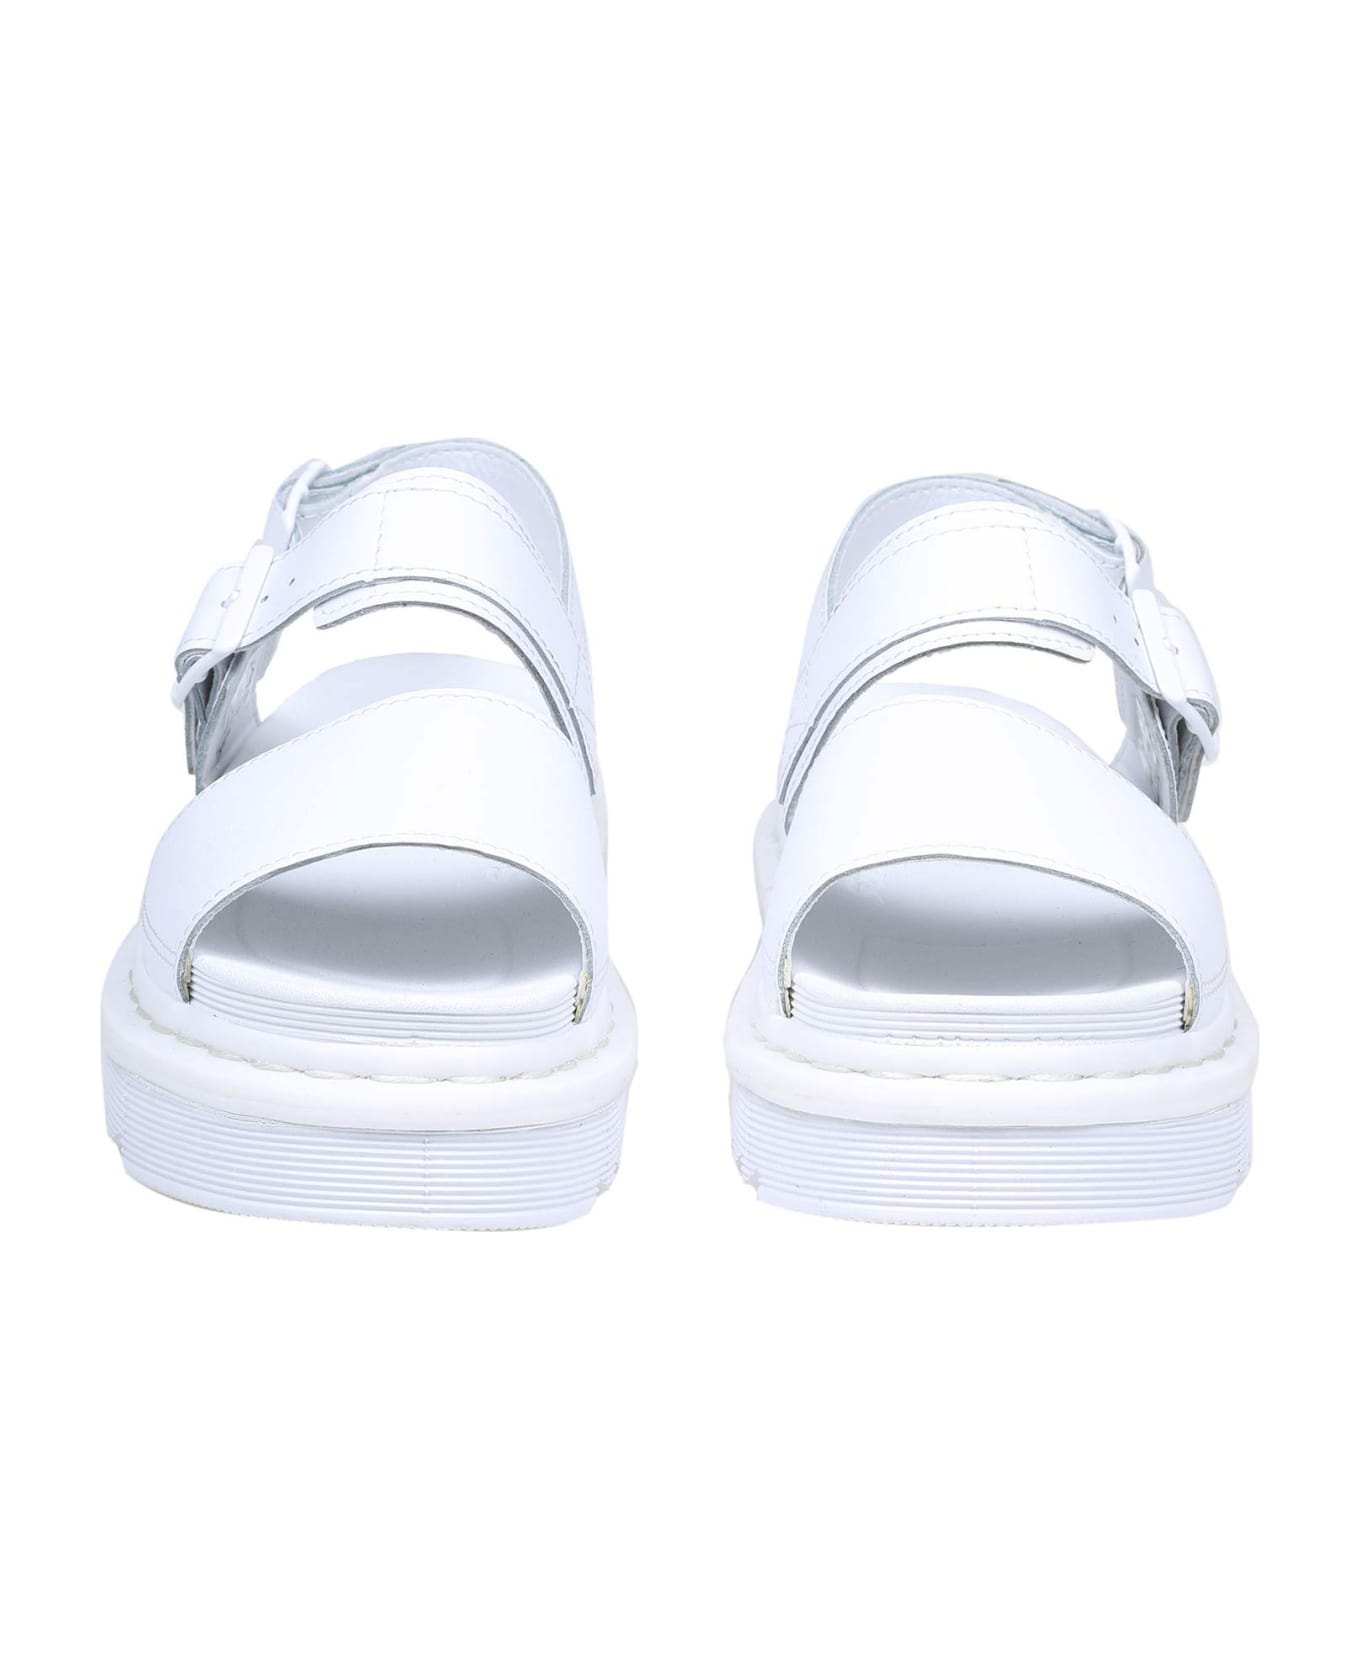 Dr. Martens Dr.martens Voss Sandal In White Leather - White Hydro